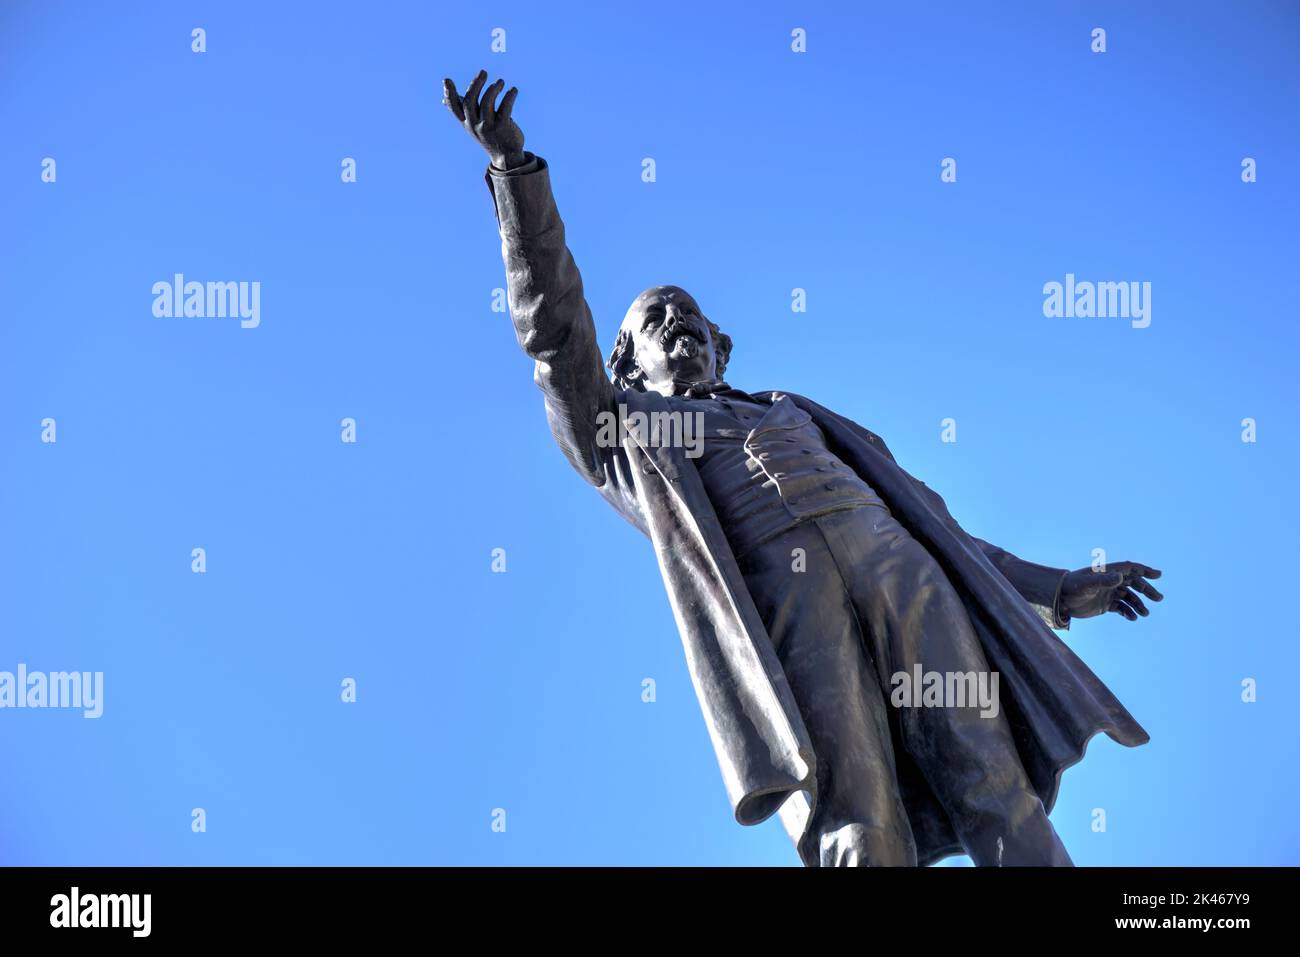 Aveiro, Portugal - August 14, 2022: Close up of statue of Jose Estevao Coelho de Magalhaes located outside district council building Stock Photo